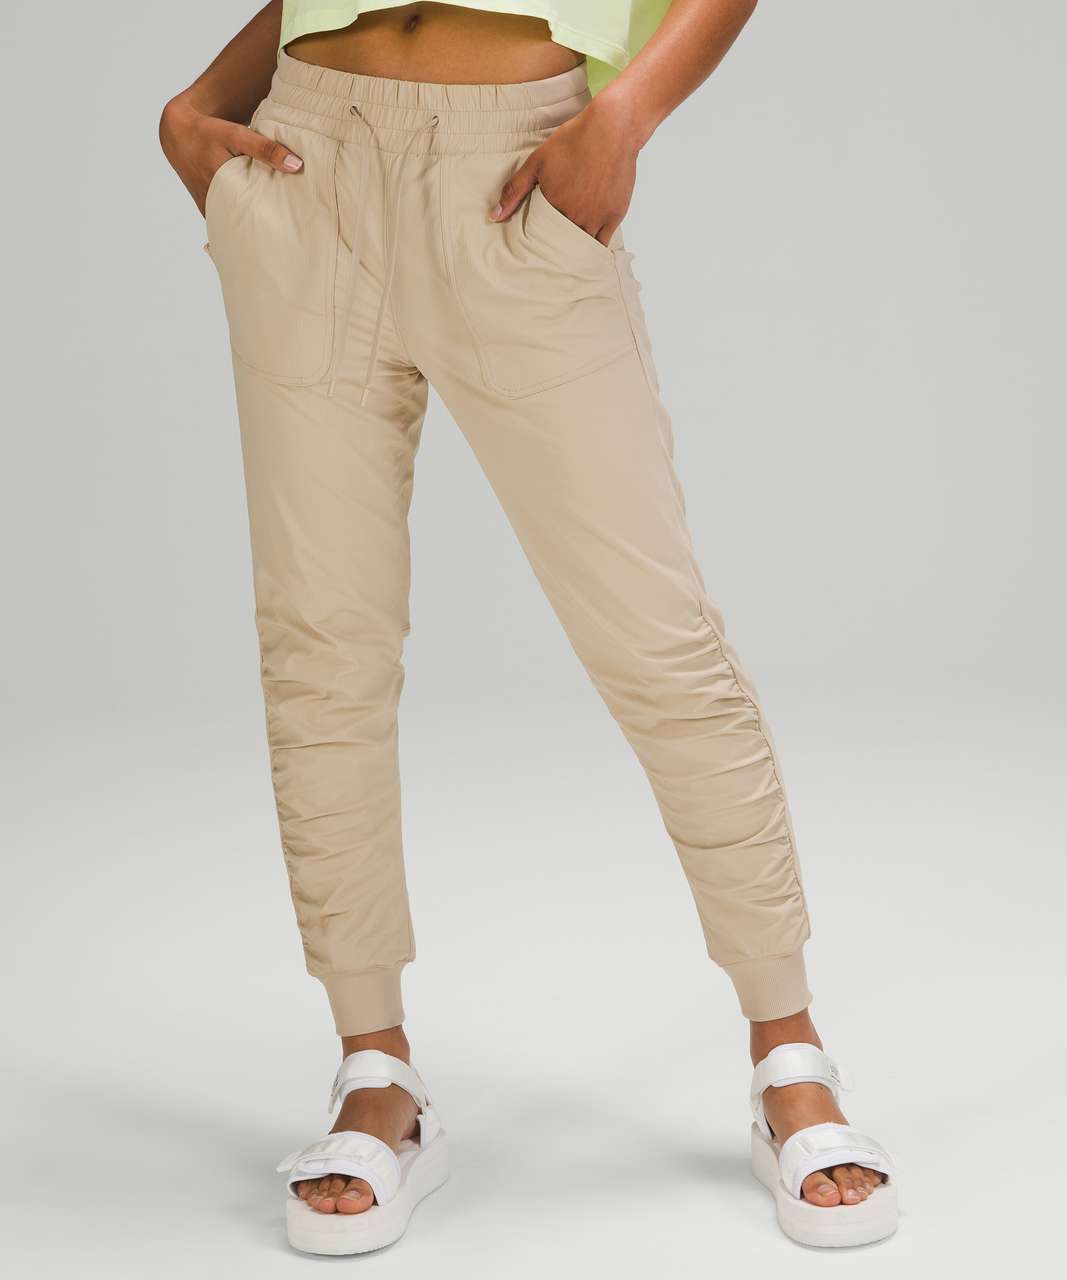 Lululemon Beyond the Studio 7/8 Jogger - Trench (First Release)